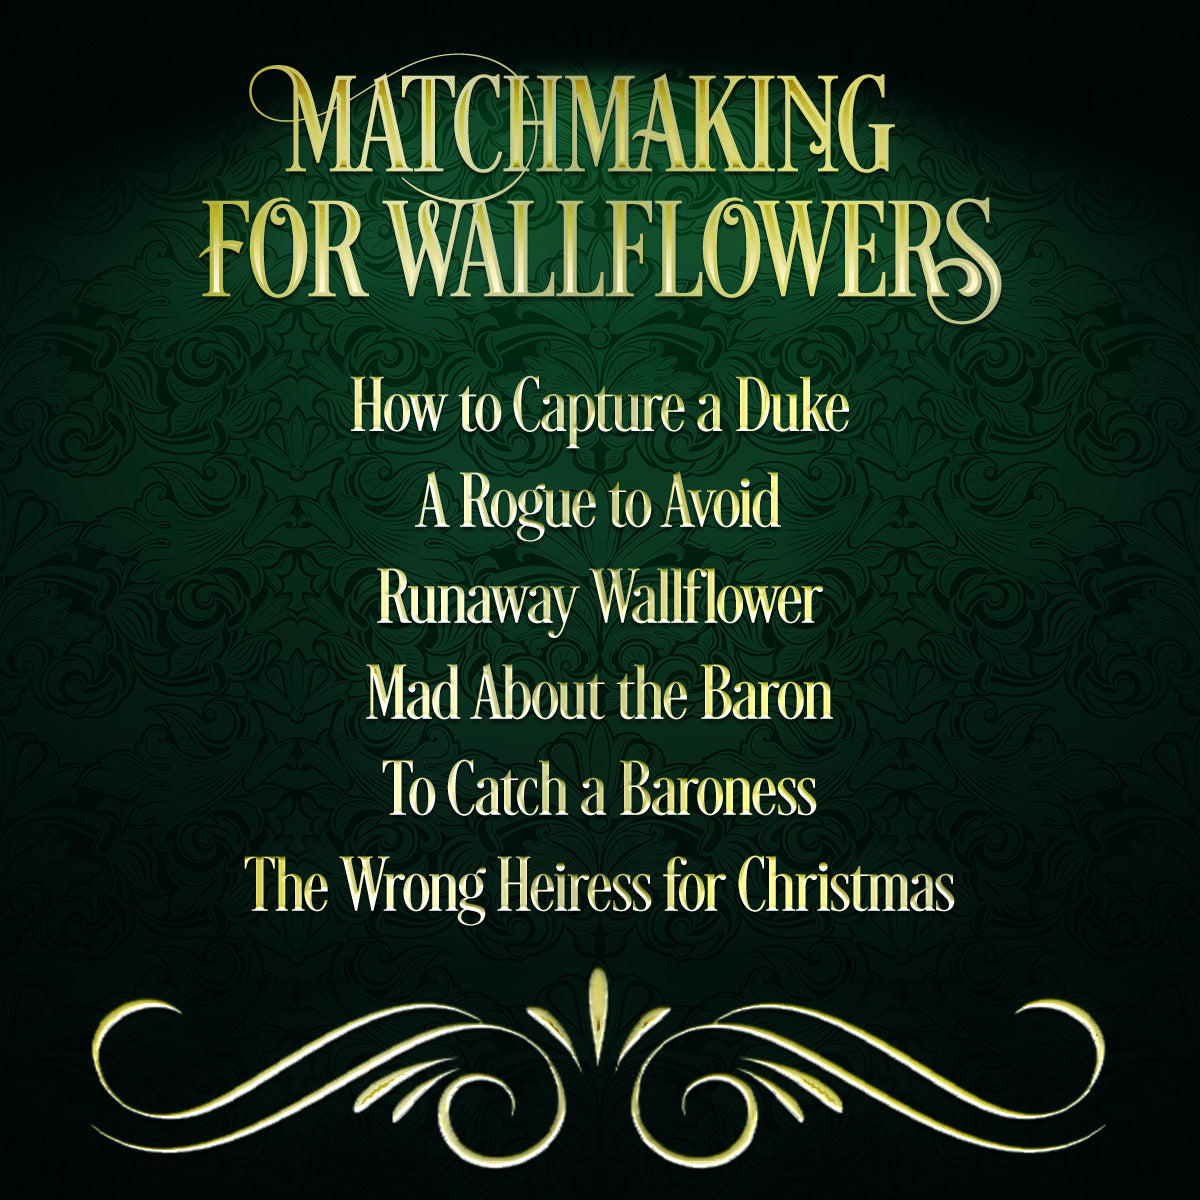 The Complete Matchmaking for Wallflowers Bundle